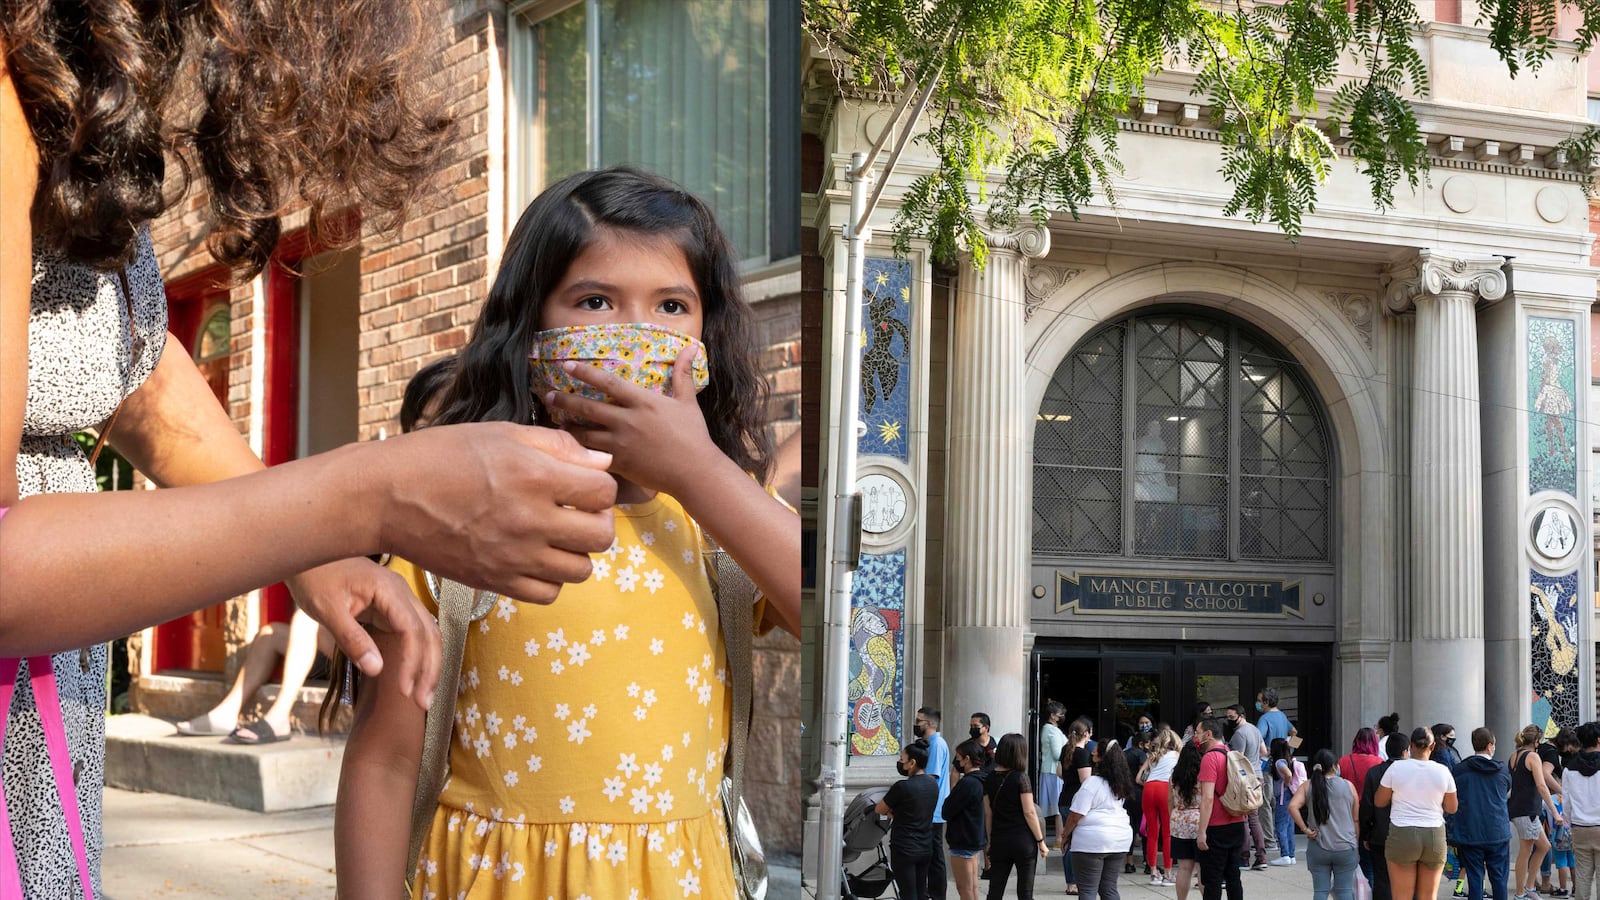 (Left) A mother helps her daughter, who is wearing a yellow dress and protective mask, prepare to head to school on their first day. (Right) Parents wait outside of the entrance of a large school with columns out front as their children enter for their first day.